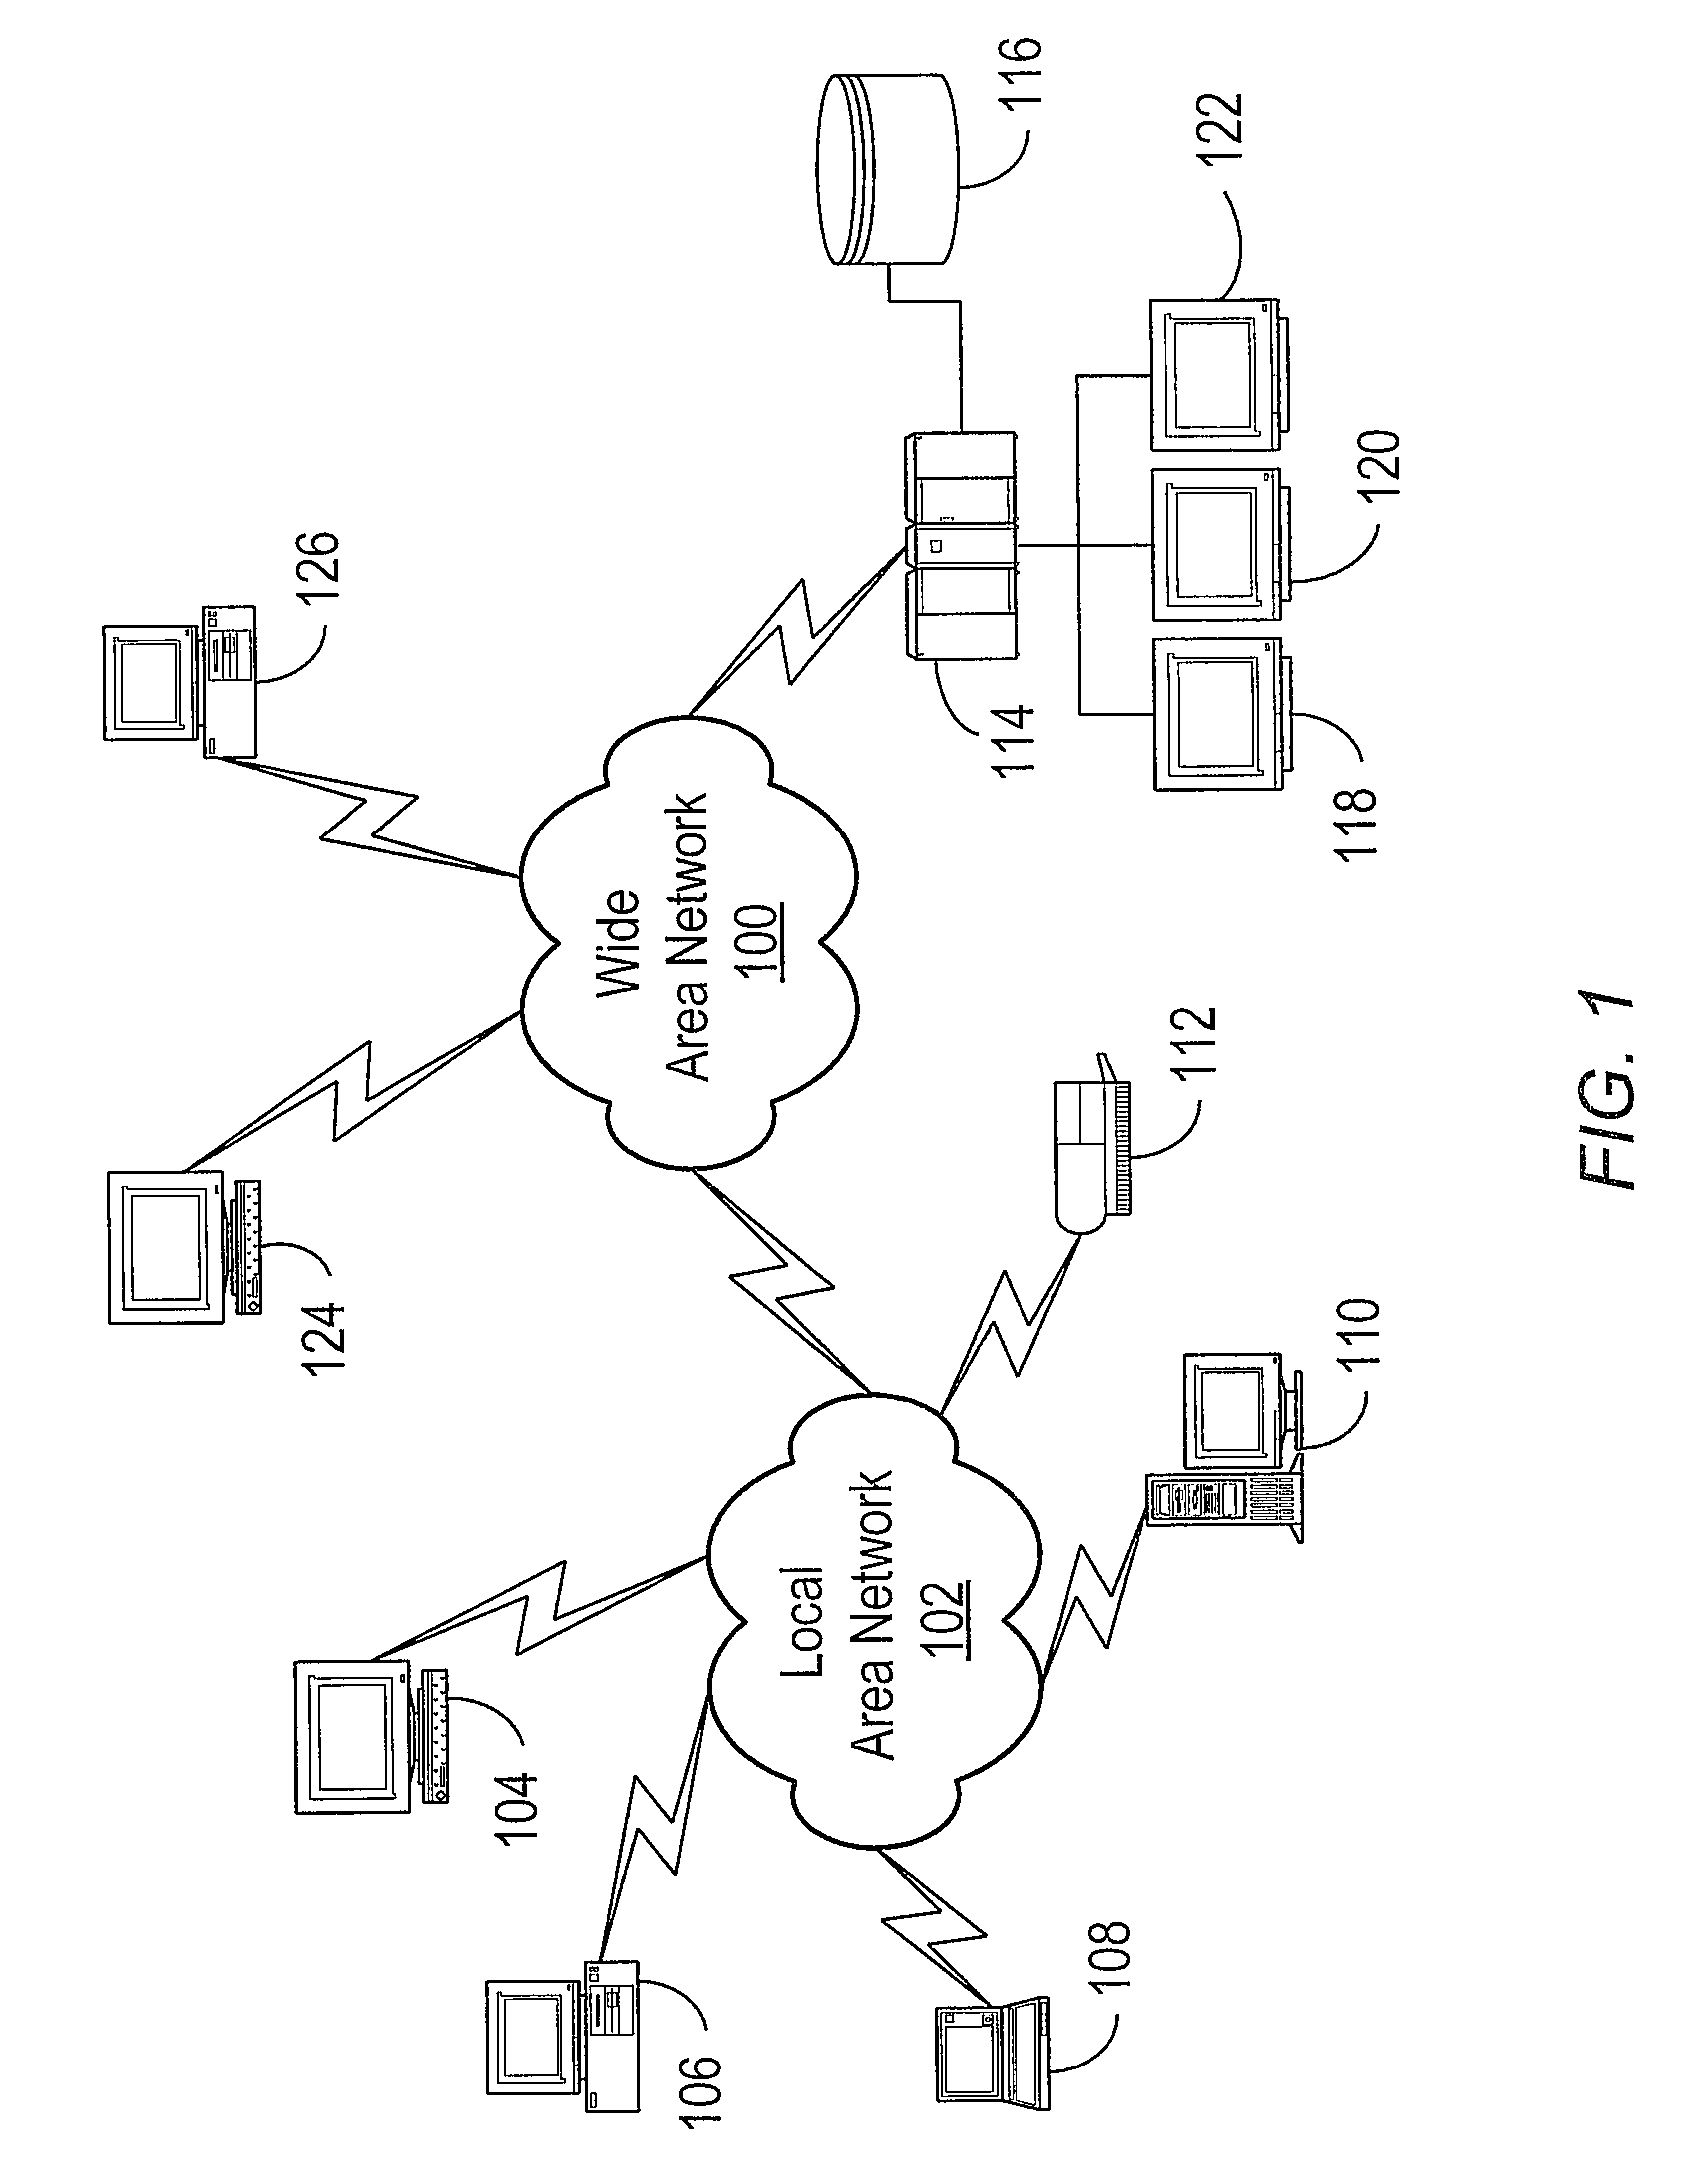 Method and system for image processing and assessment of blockages of heart blood vessels